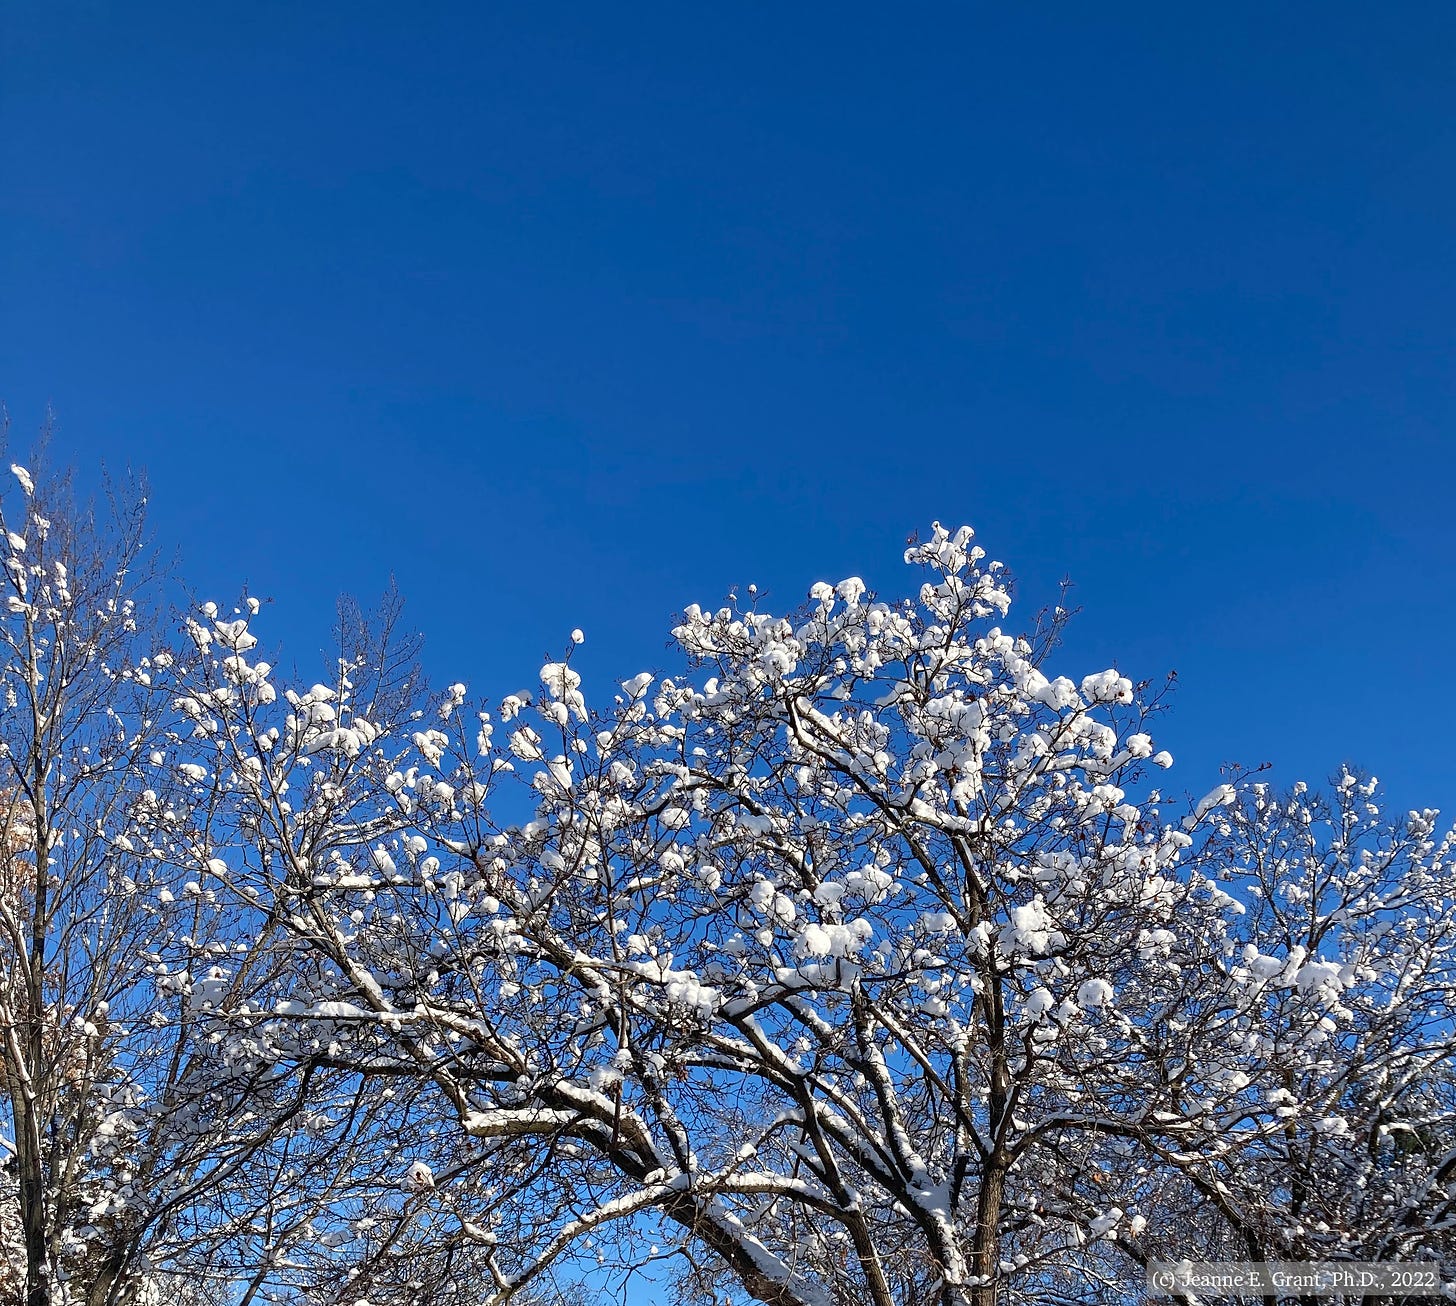 Against the background of an unbelievably blue sky, the top half of tree's branches hold snow globules that look like blossoms.